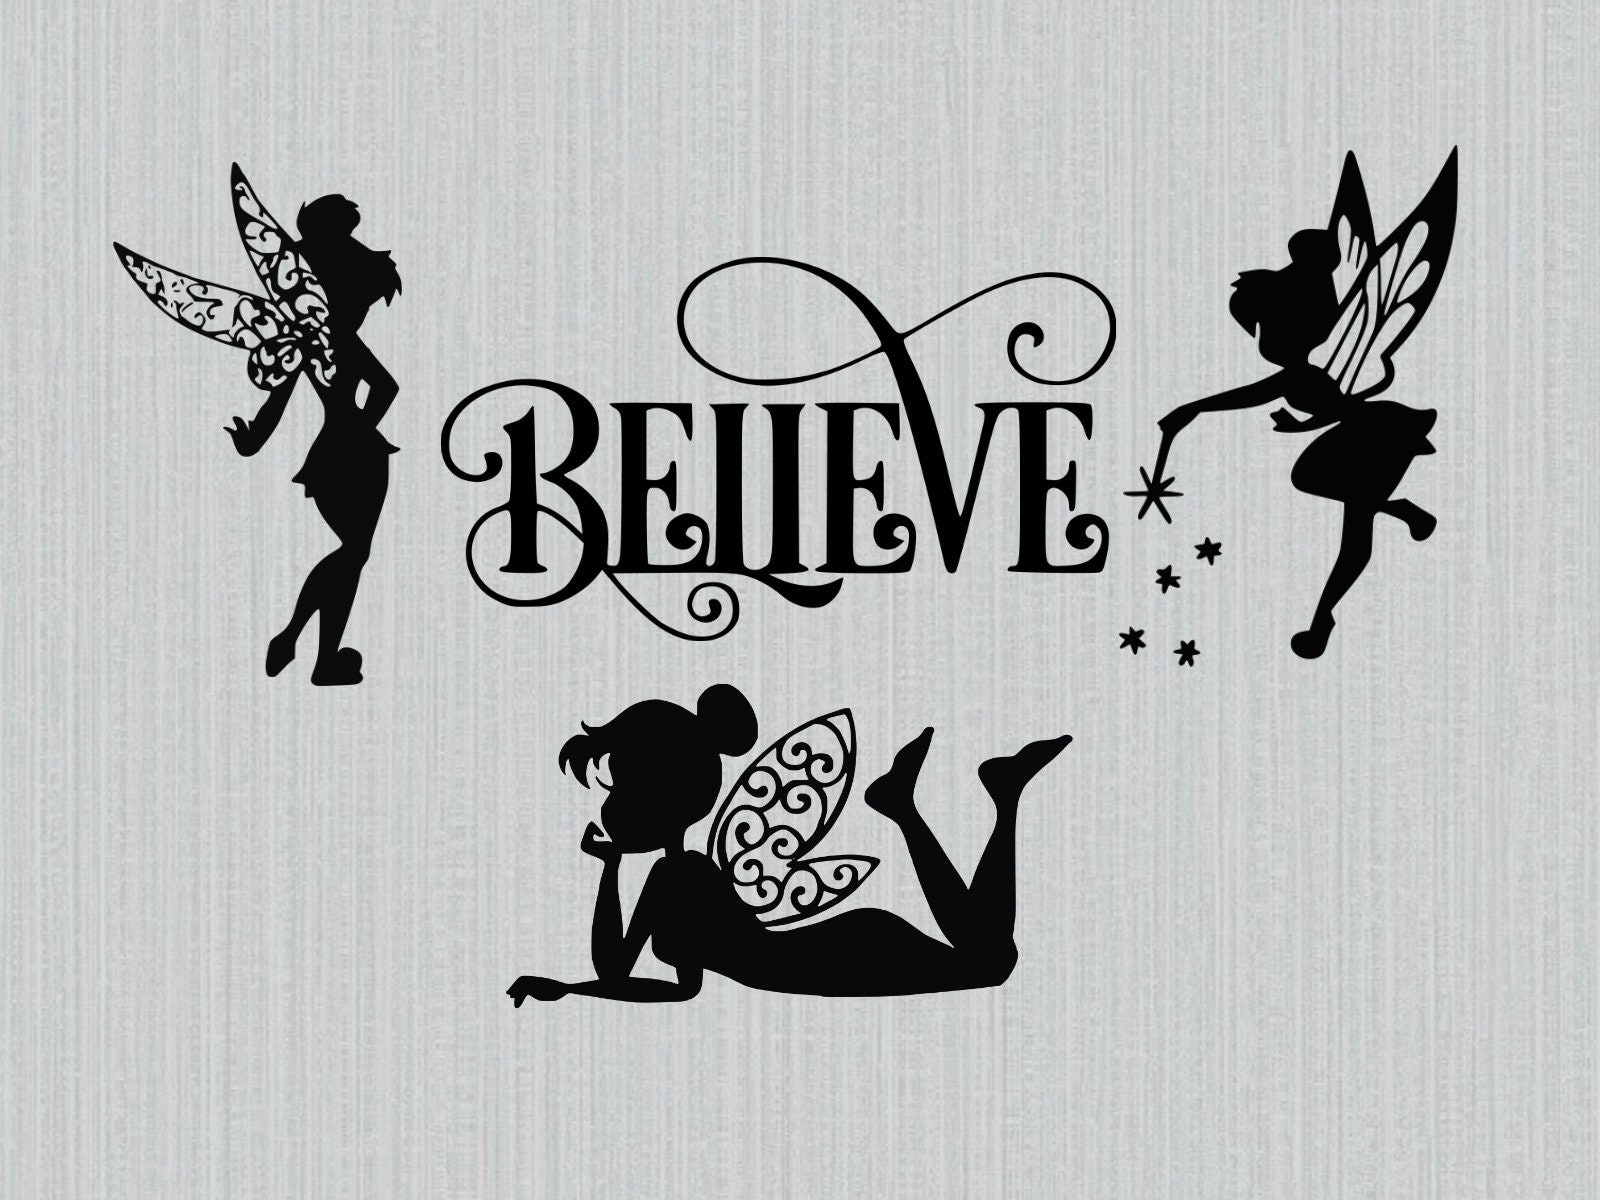 Free tinkerbell font vector download in ai, svg, eps and cdr. 